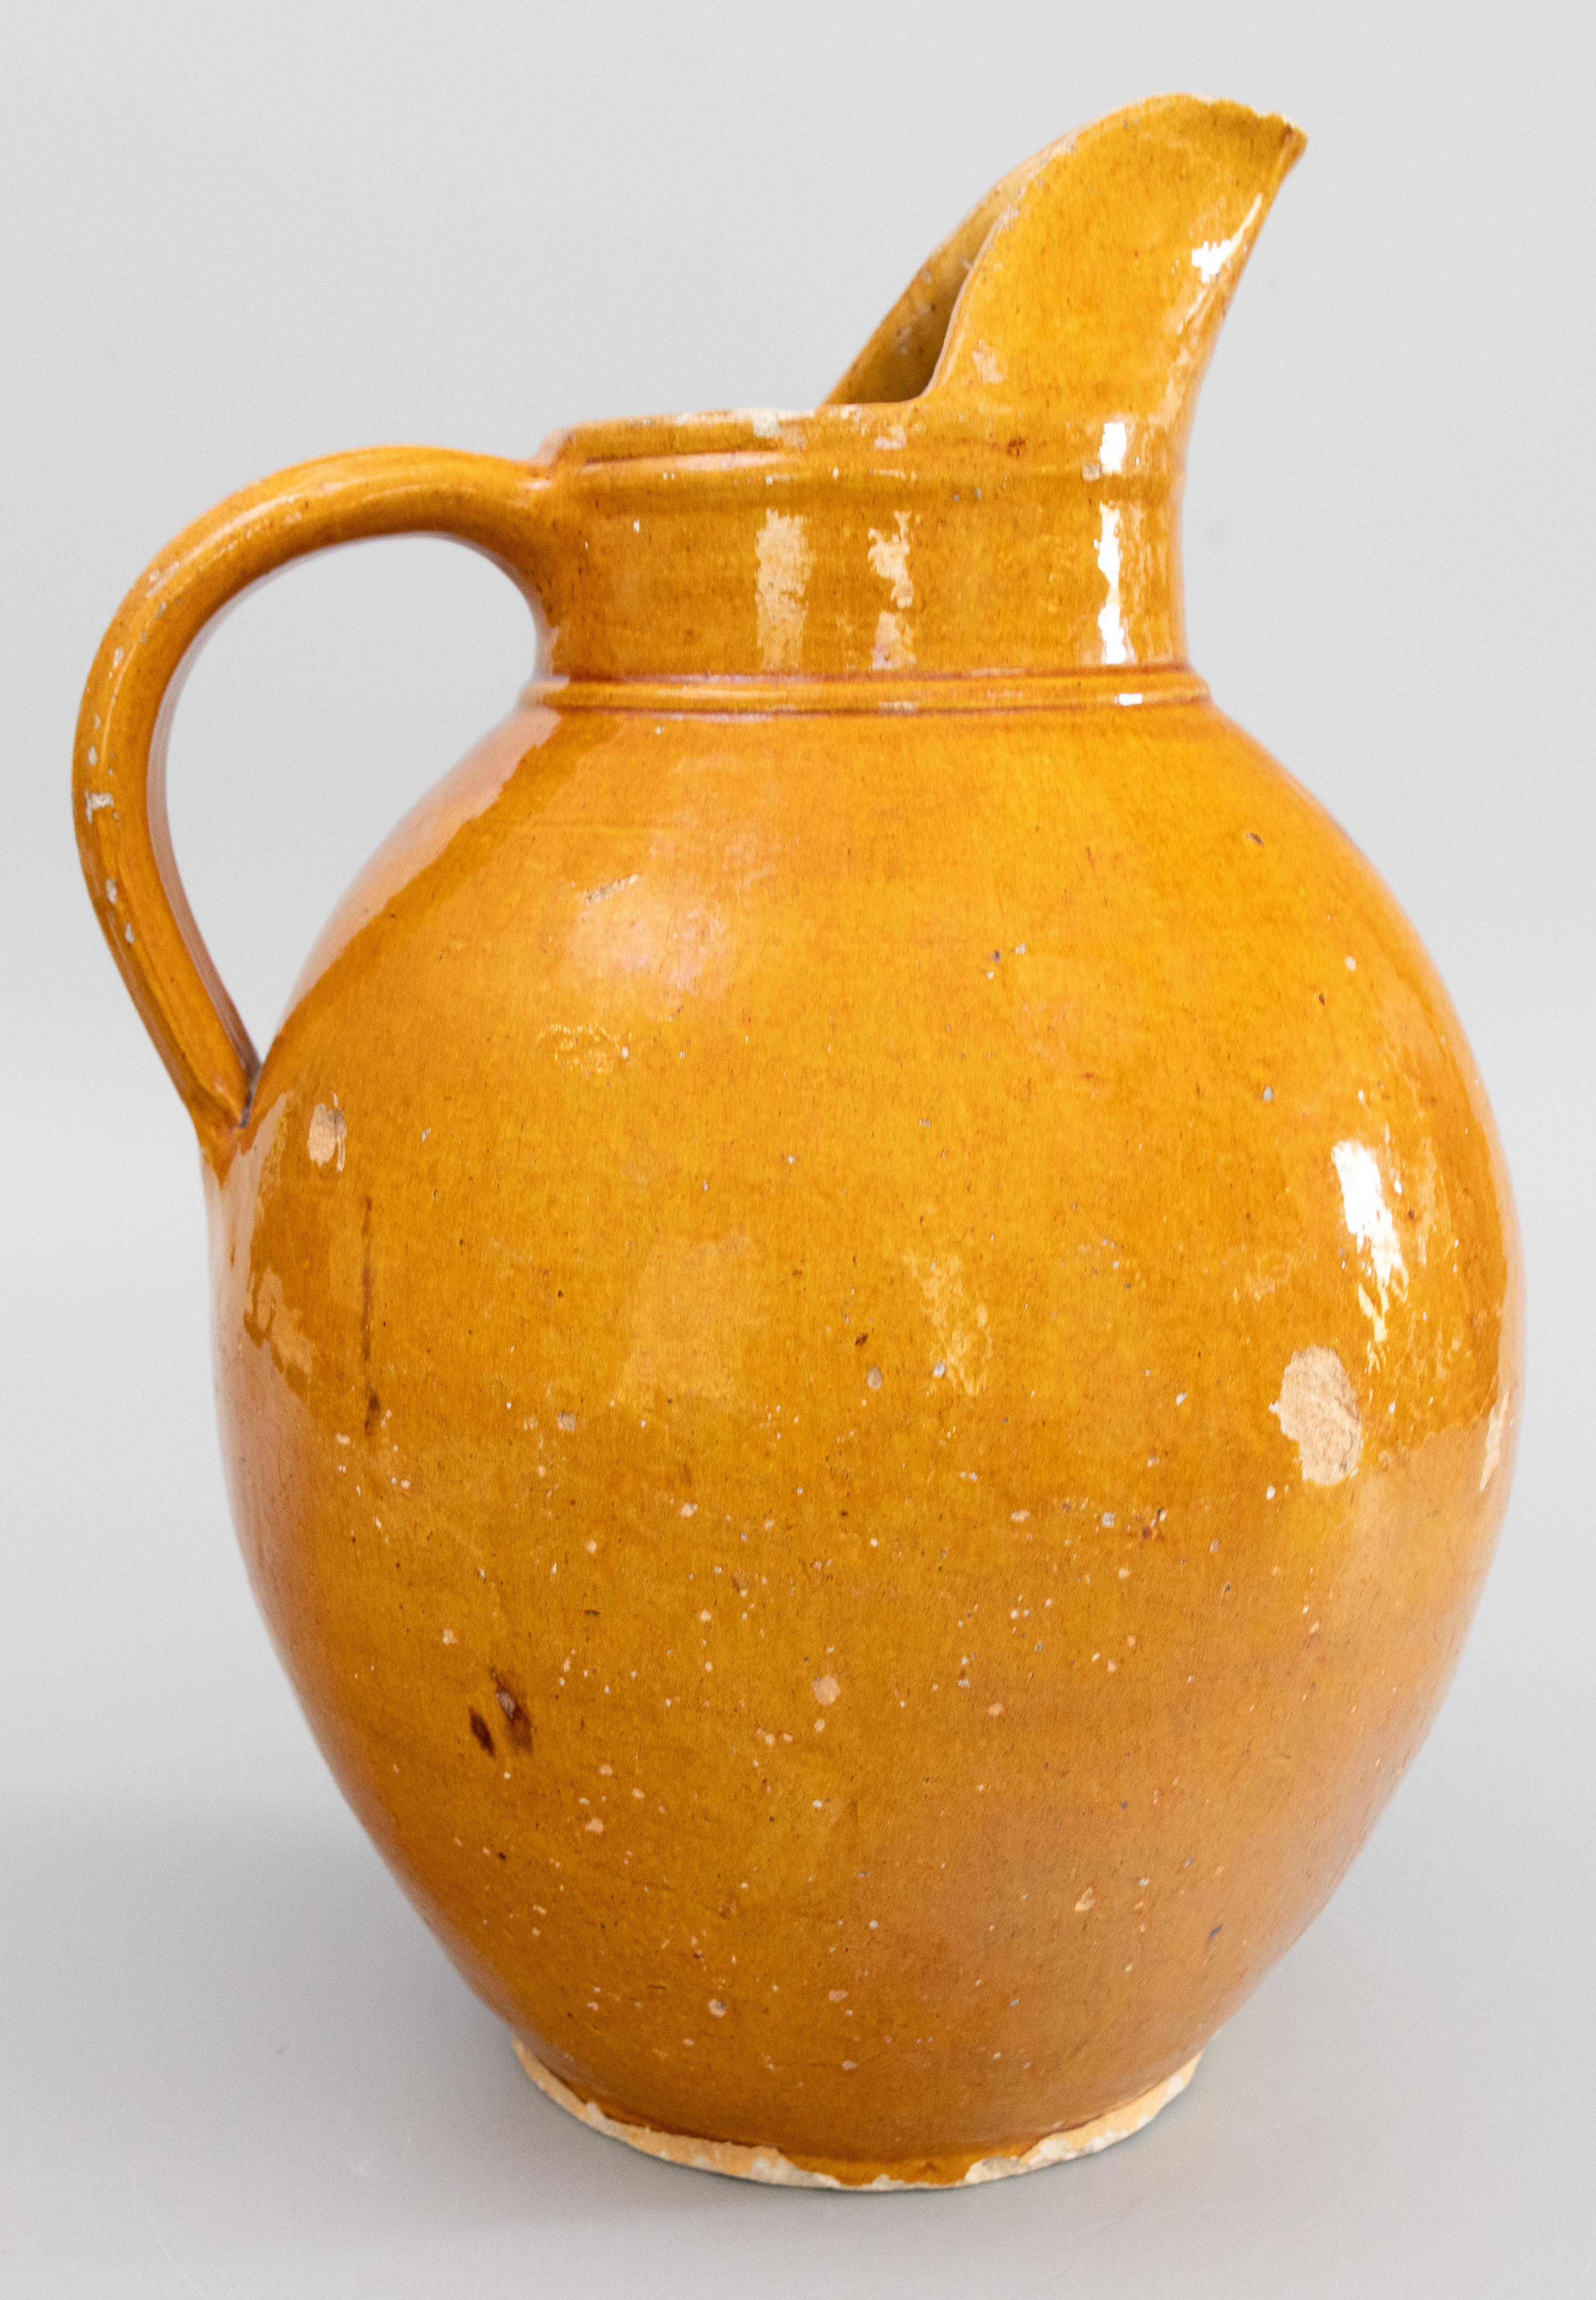 A lovely antique 19th-Century Country French ocher yellow glazed terracotta pottery Provençal pitcher/ jug / wine ewer from Provence in southeastern France. This charming piece is a nice large size with a shaped spout and bulbous design in a lovely